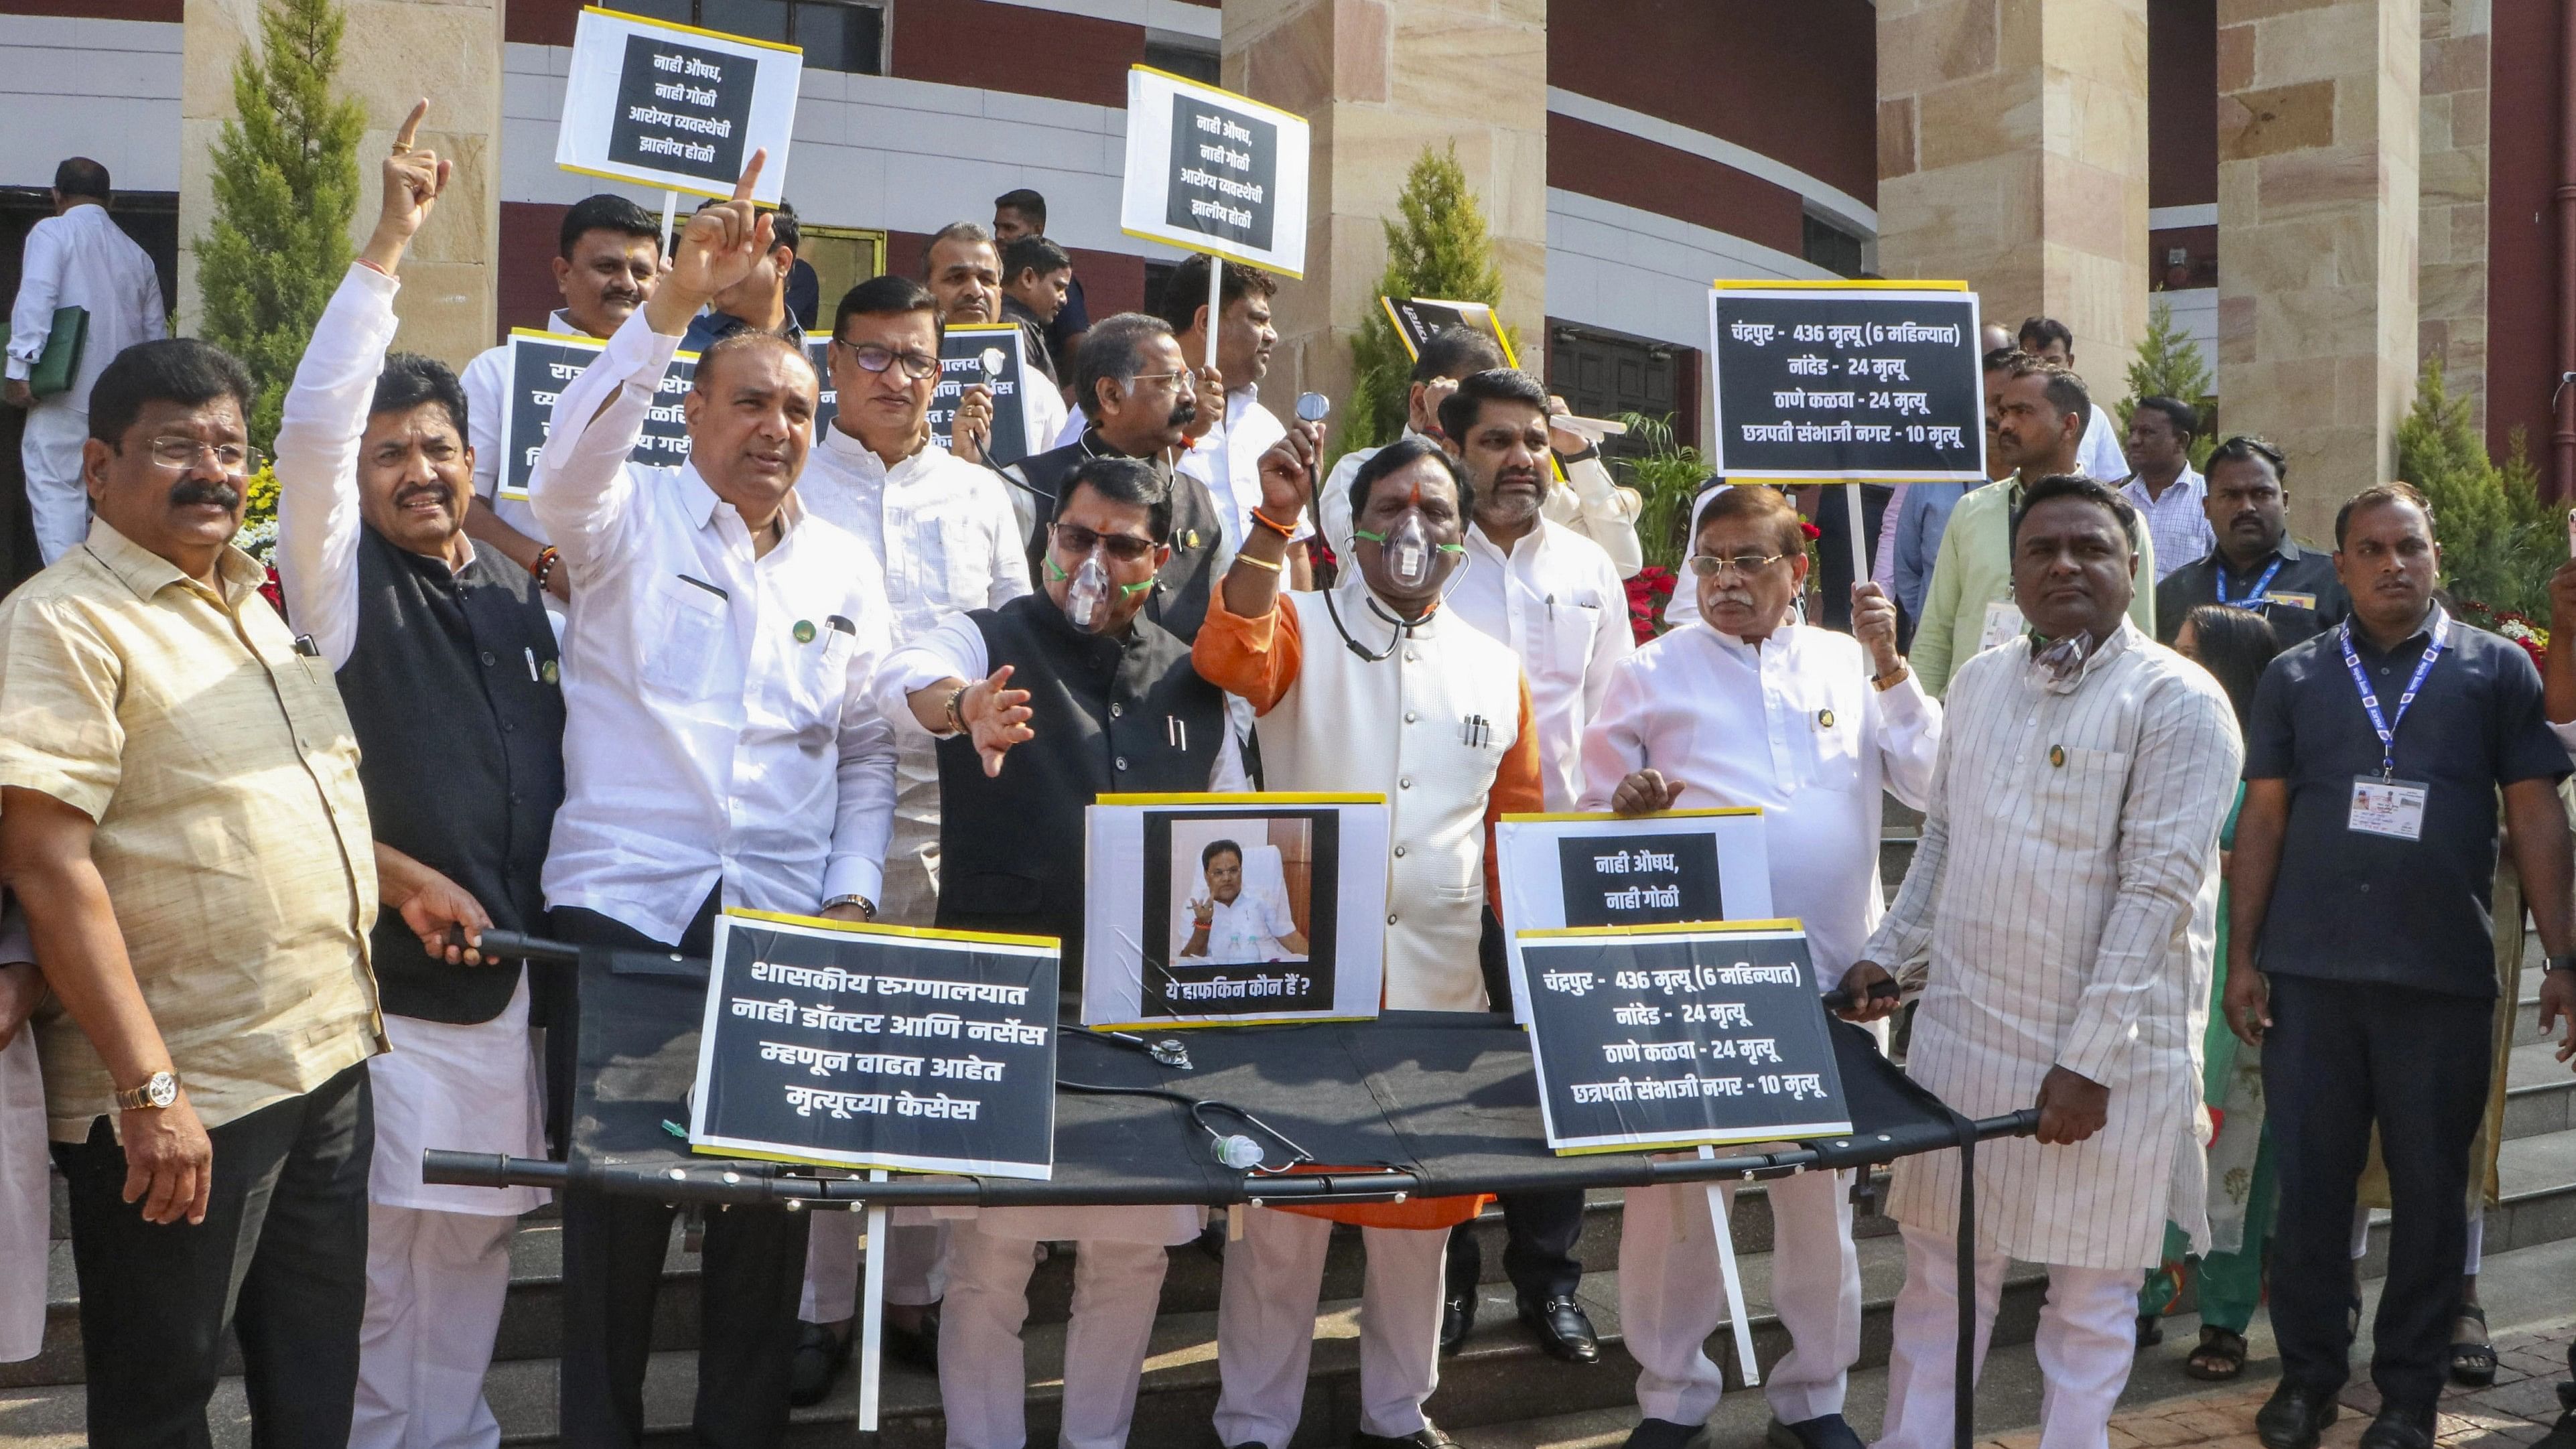 <div class="paragraphs"><p>Opposition MLAs stage a protest against the Maharashtra government and State Health Minister during the Winter session of Maharashtra Assembly, in Nagpur.</p></div>